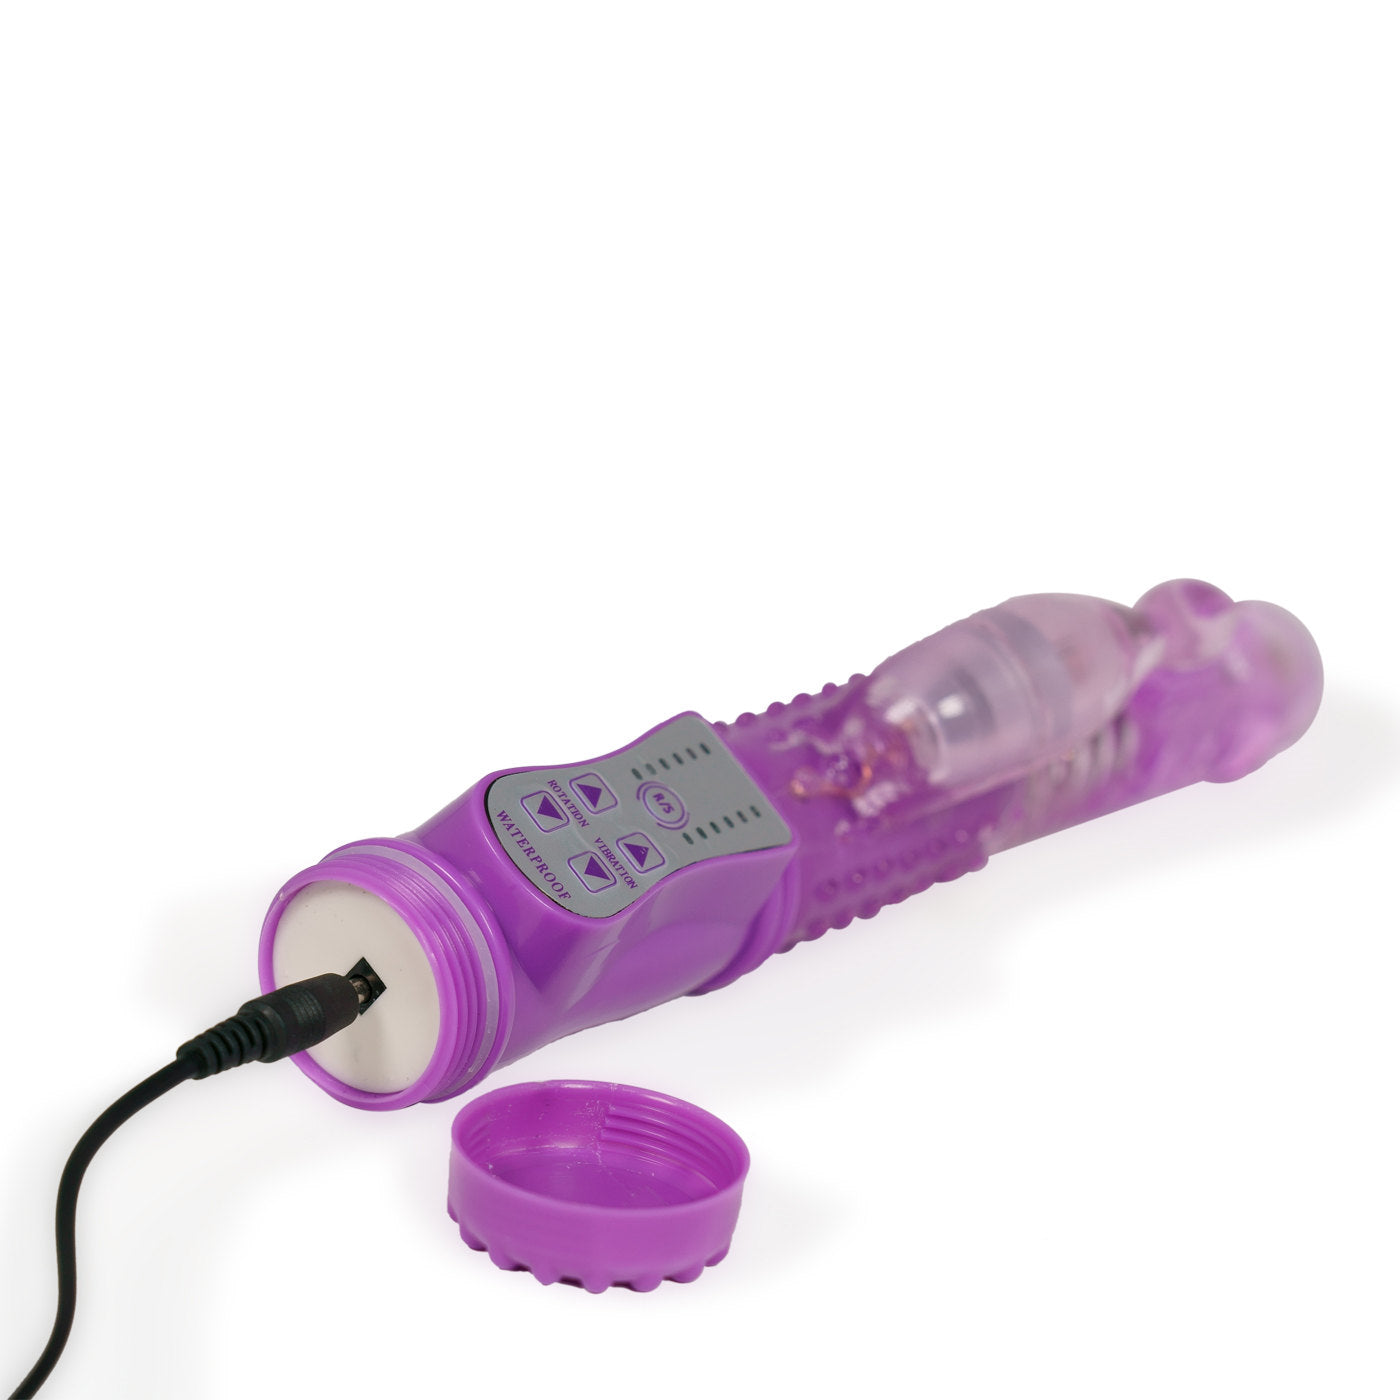 Double Delight 7 Function Rotating Beaded Realistic Rechargeable Rabbit Vibrator